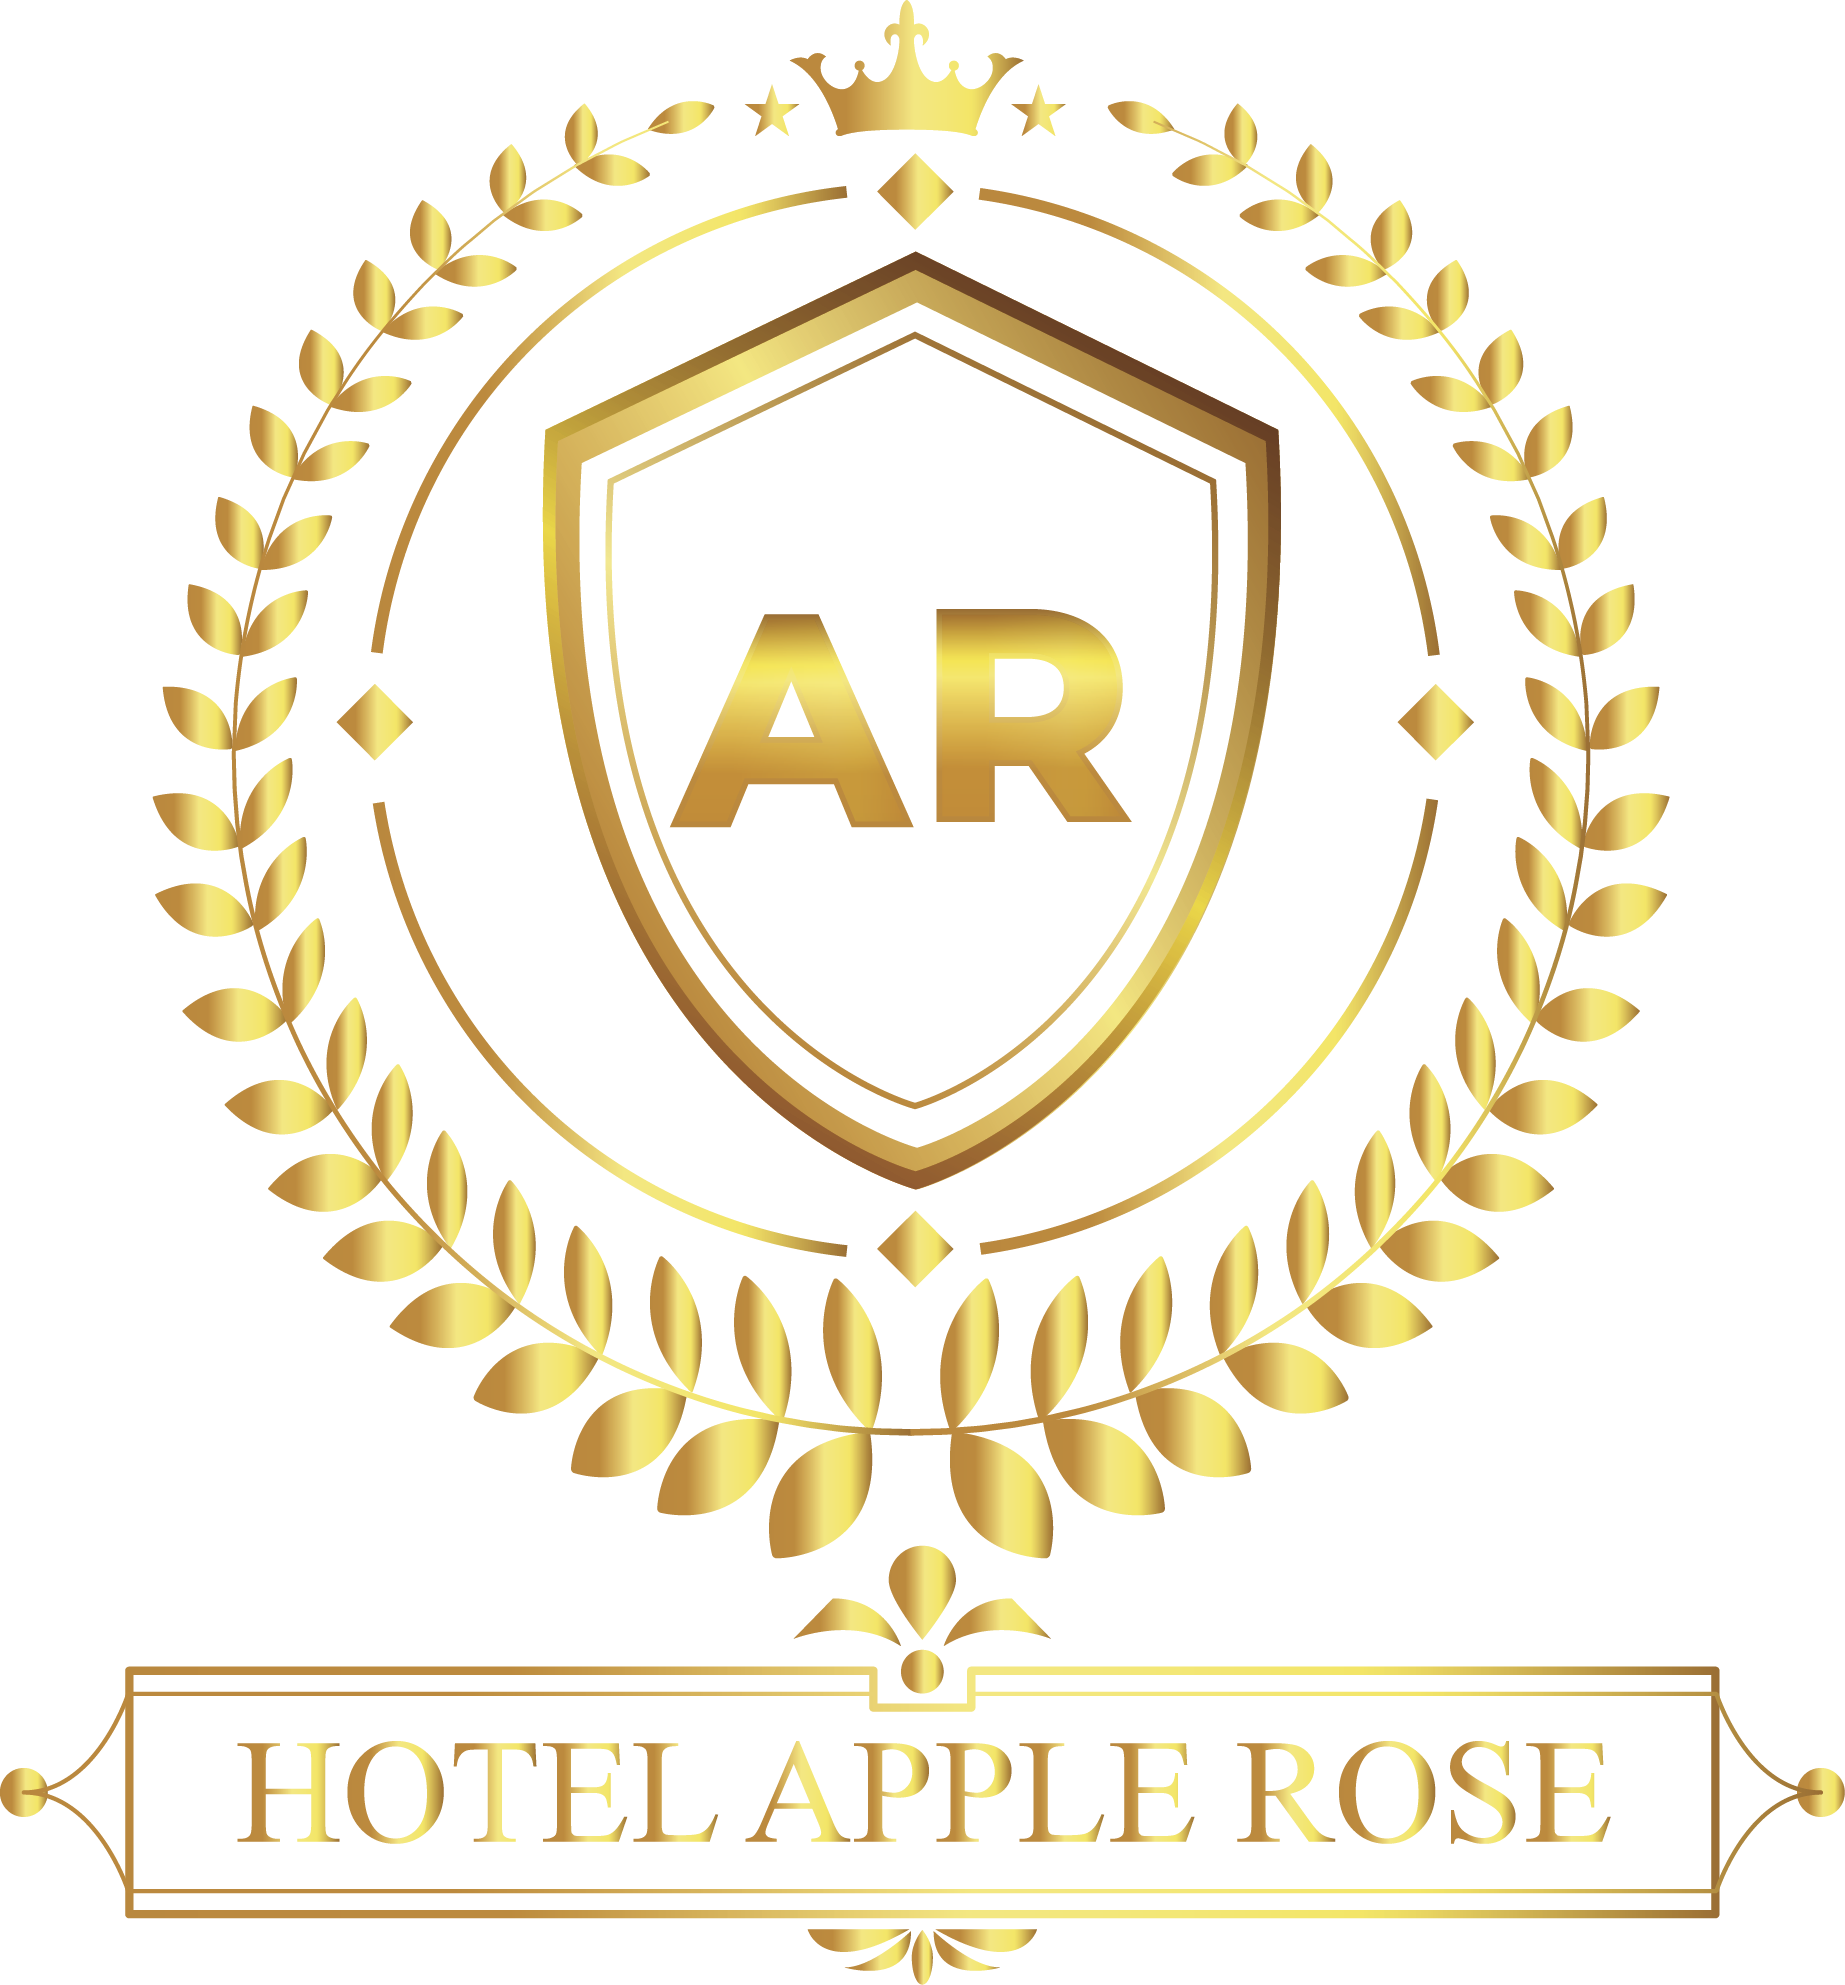 Hotel Apple Rose|Home-stay|Accomodation